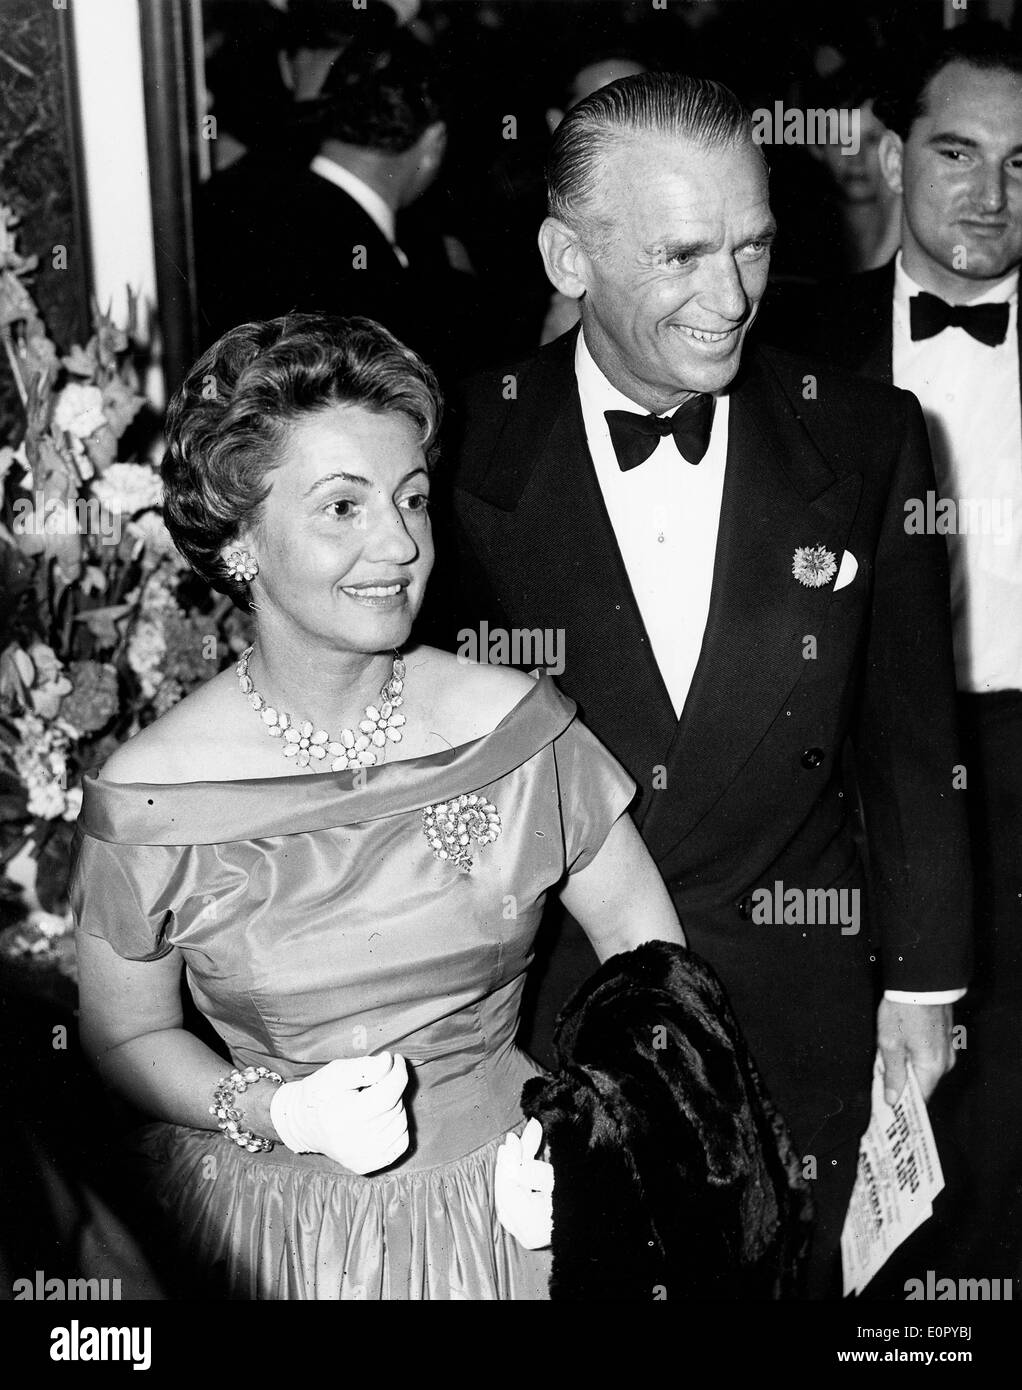 Actor Douglas Fairbanks Jr. at film premiere with wife Stock Photo